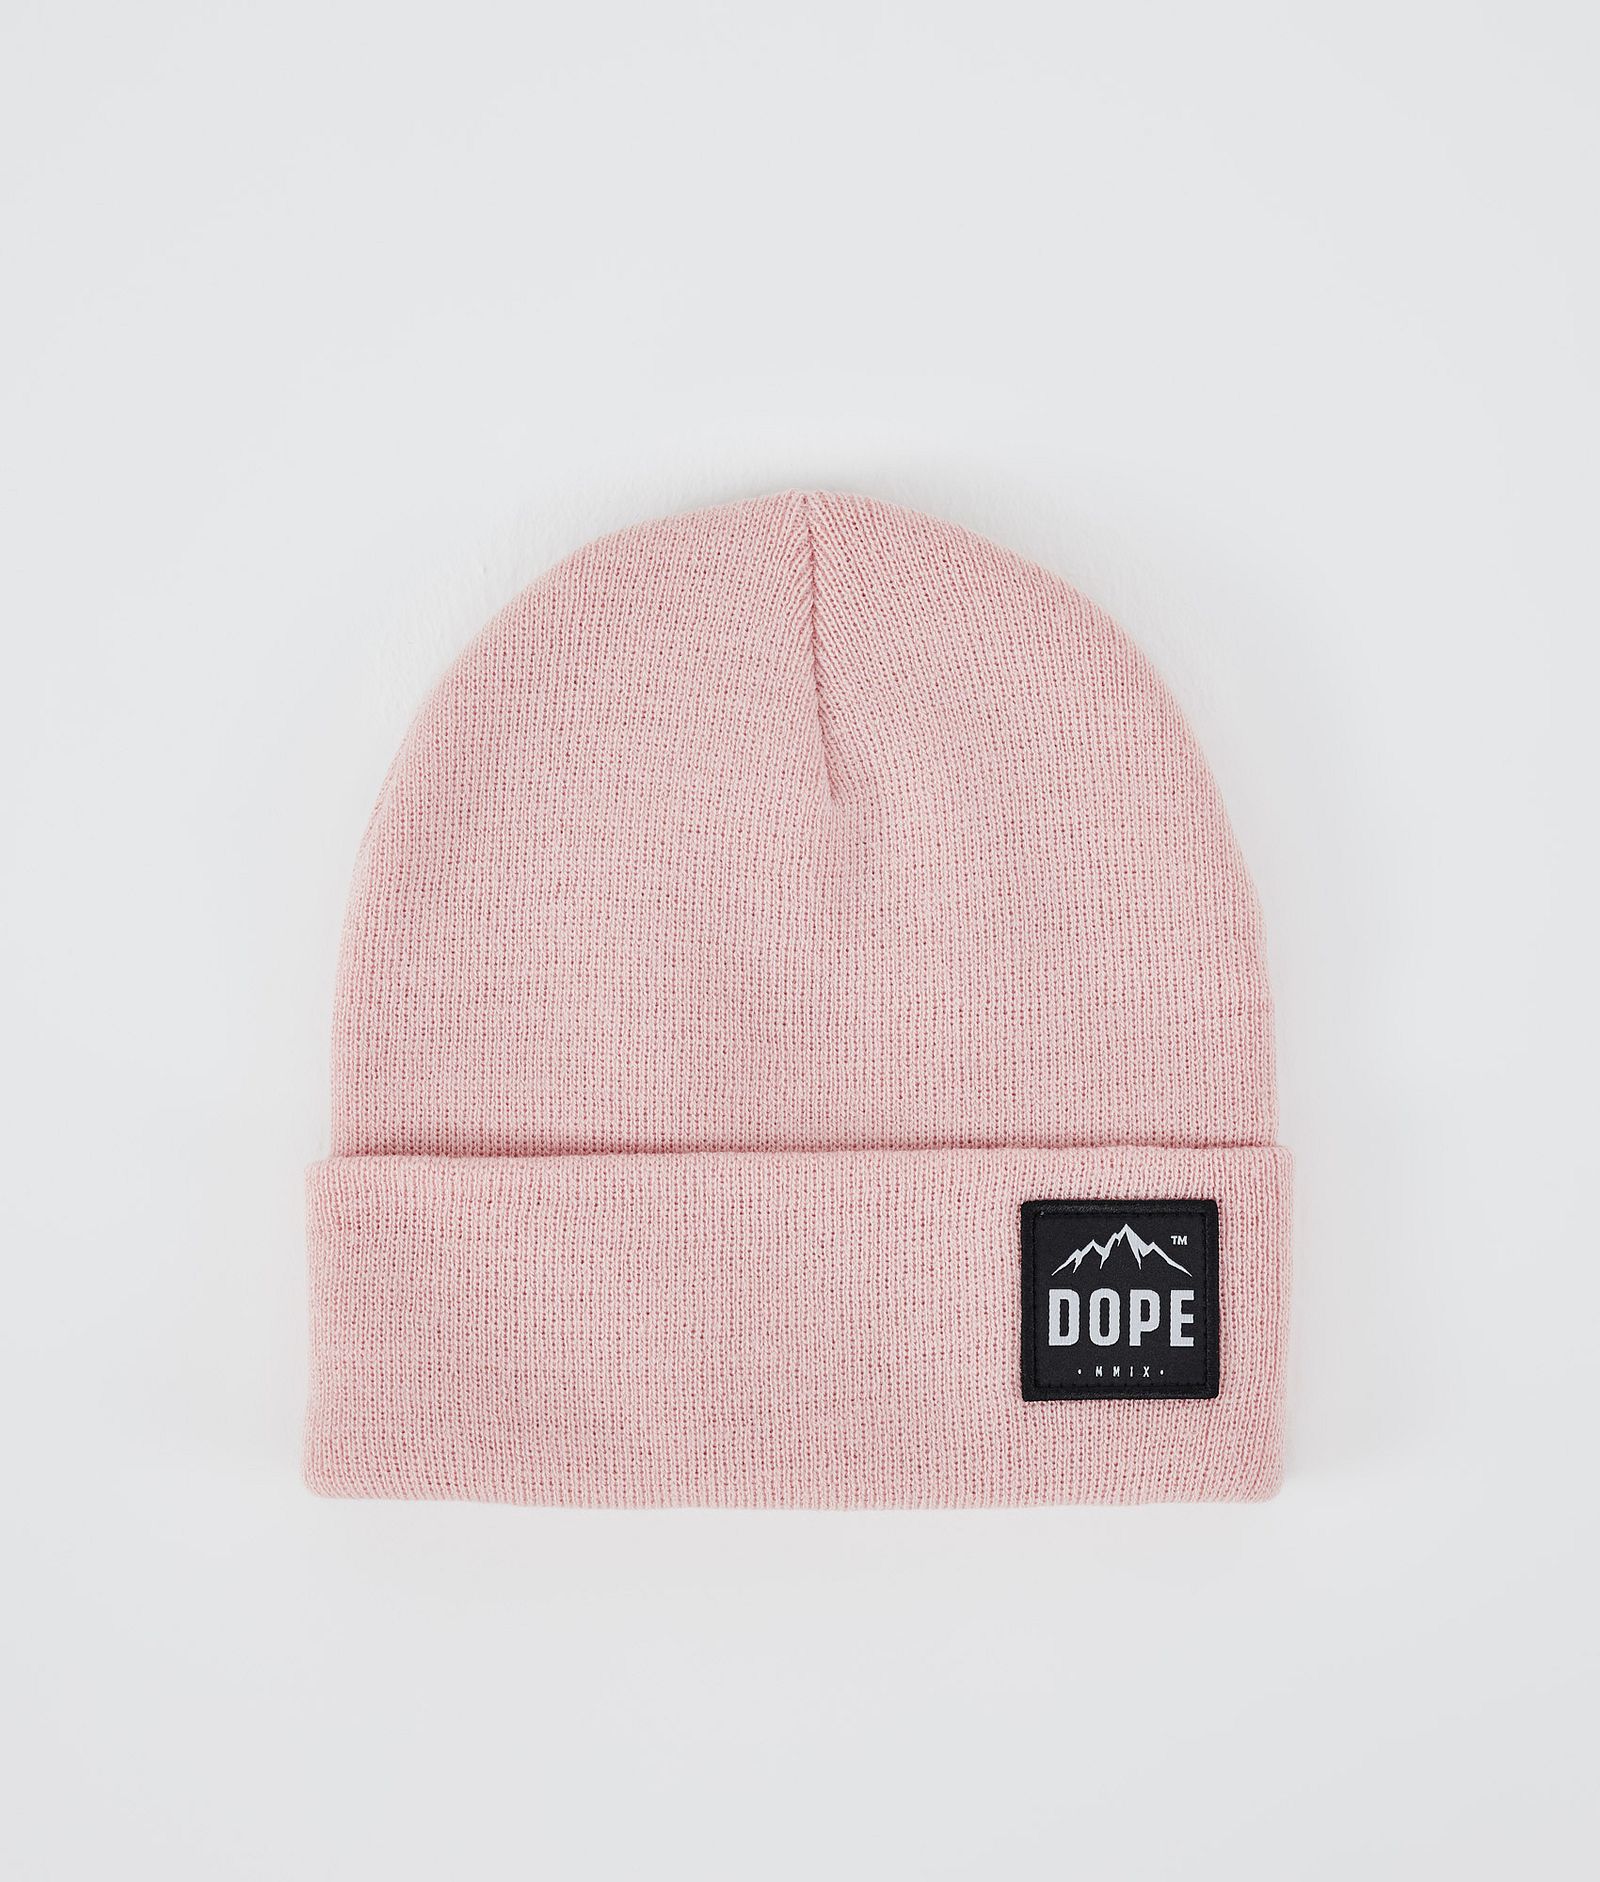 Dope Paradise 2022 Beanie Soft Pink, Image 1 of 3